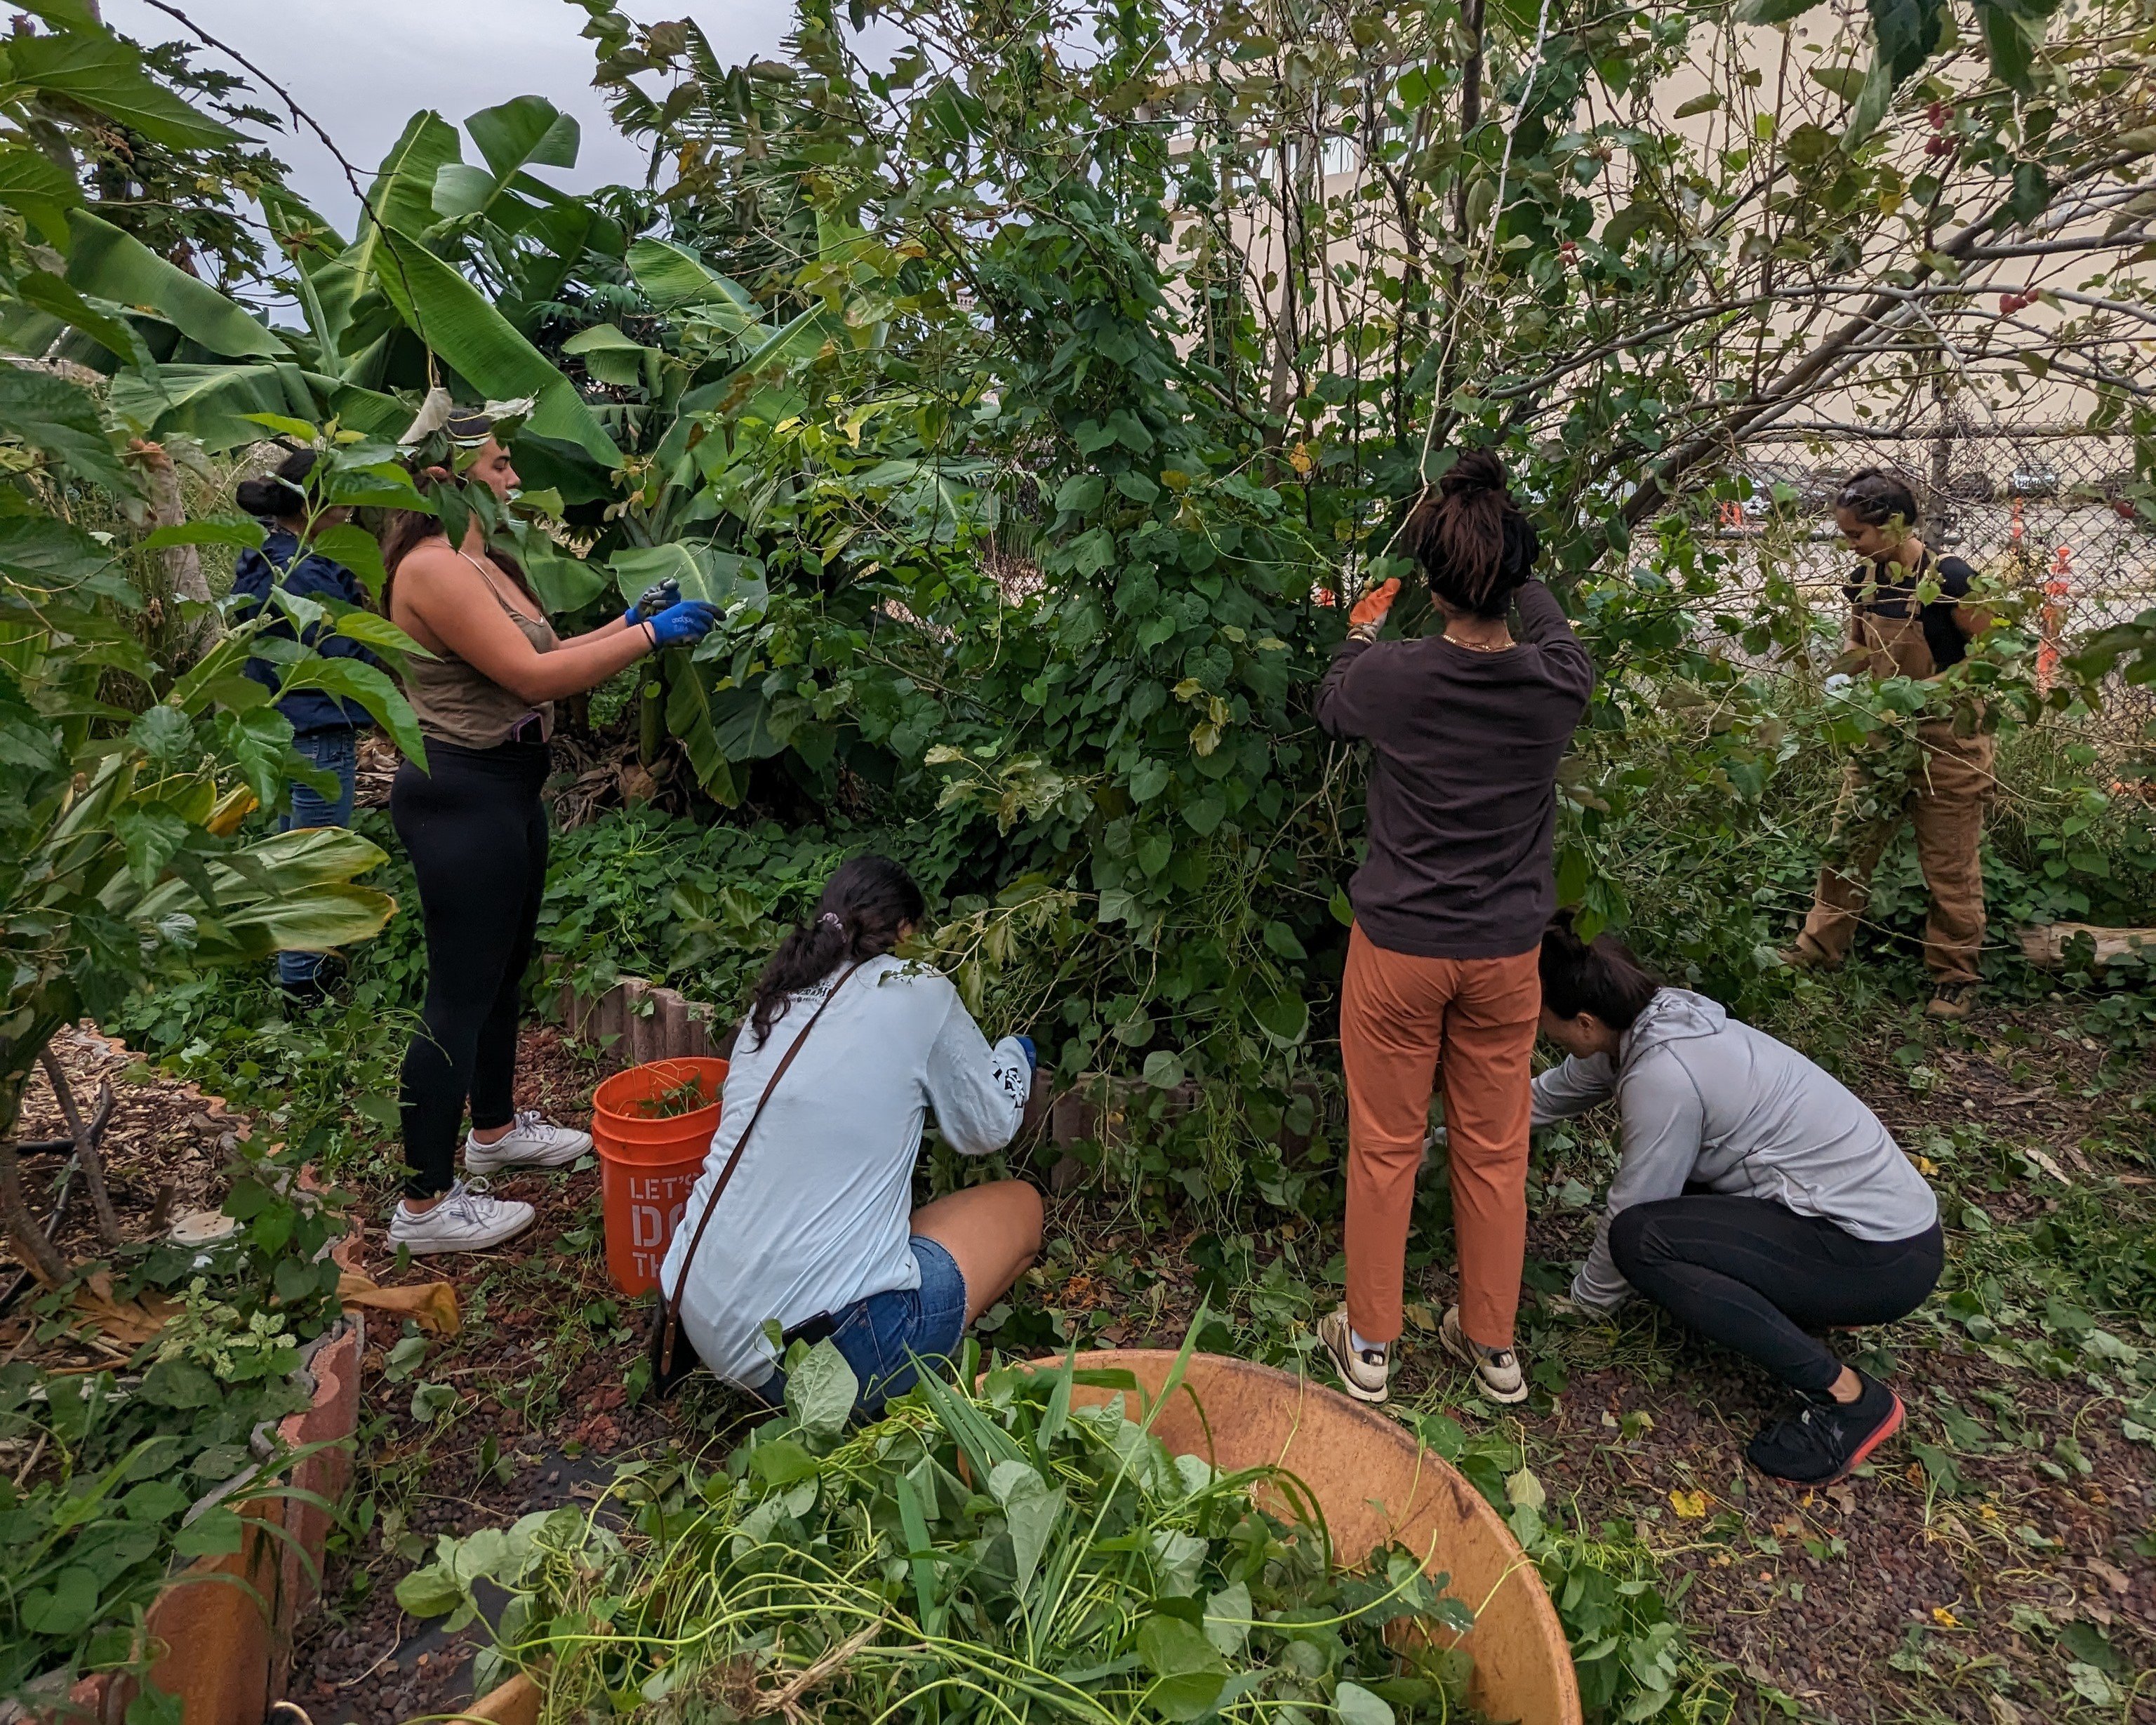 Volunteers helping to remove weeds from a Mulberry tree